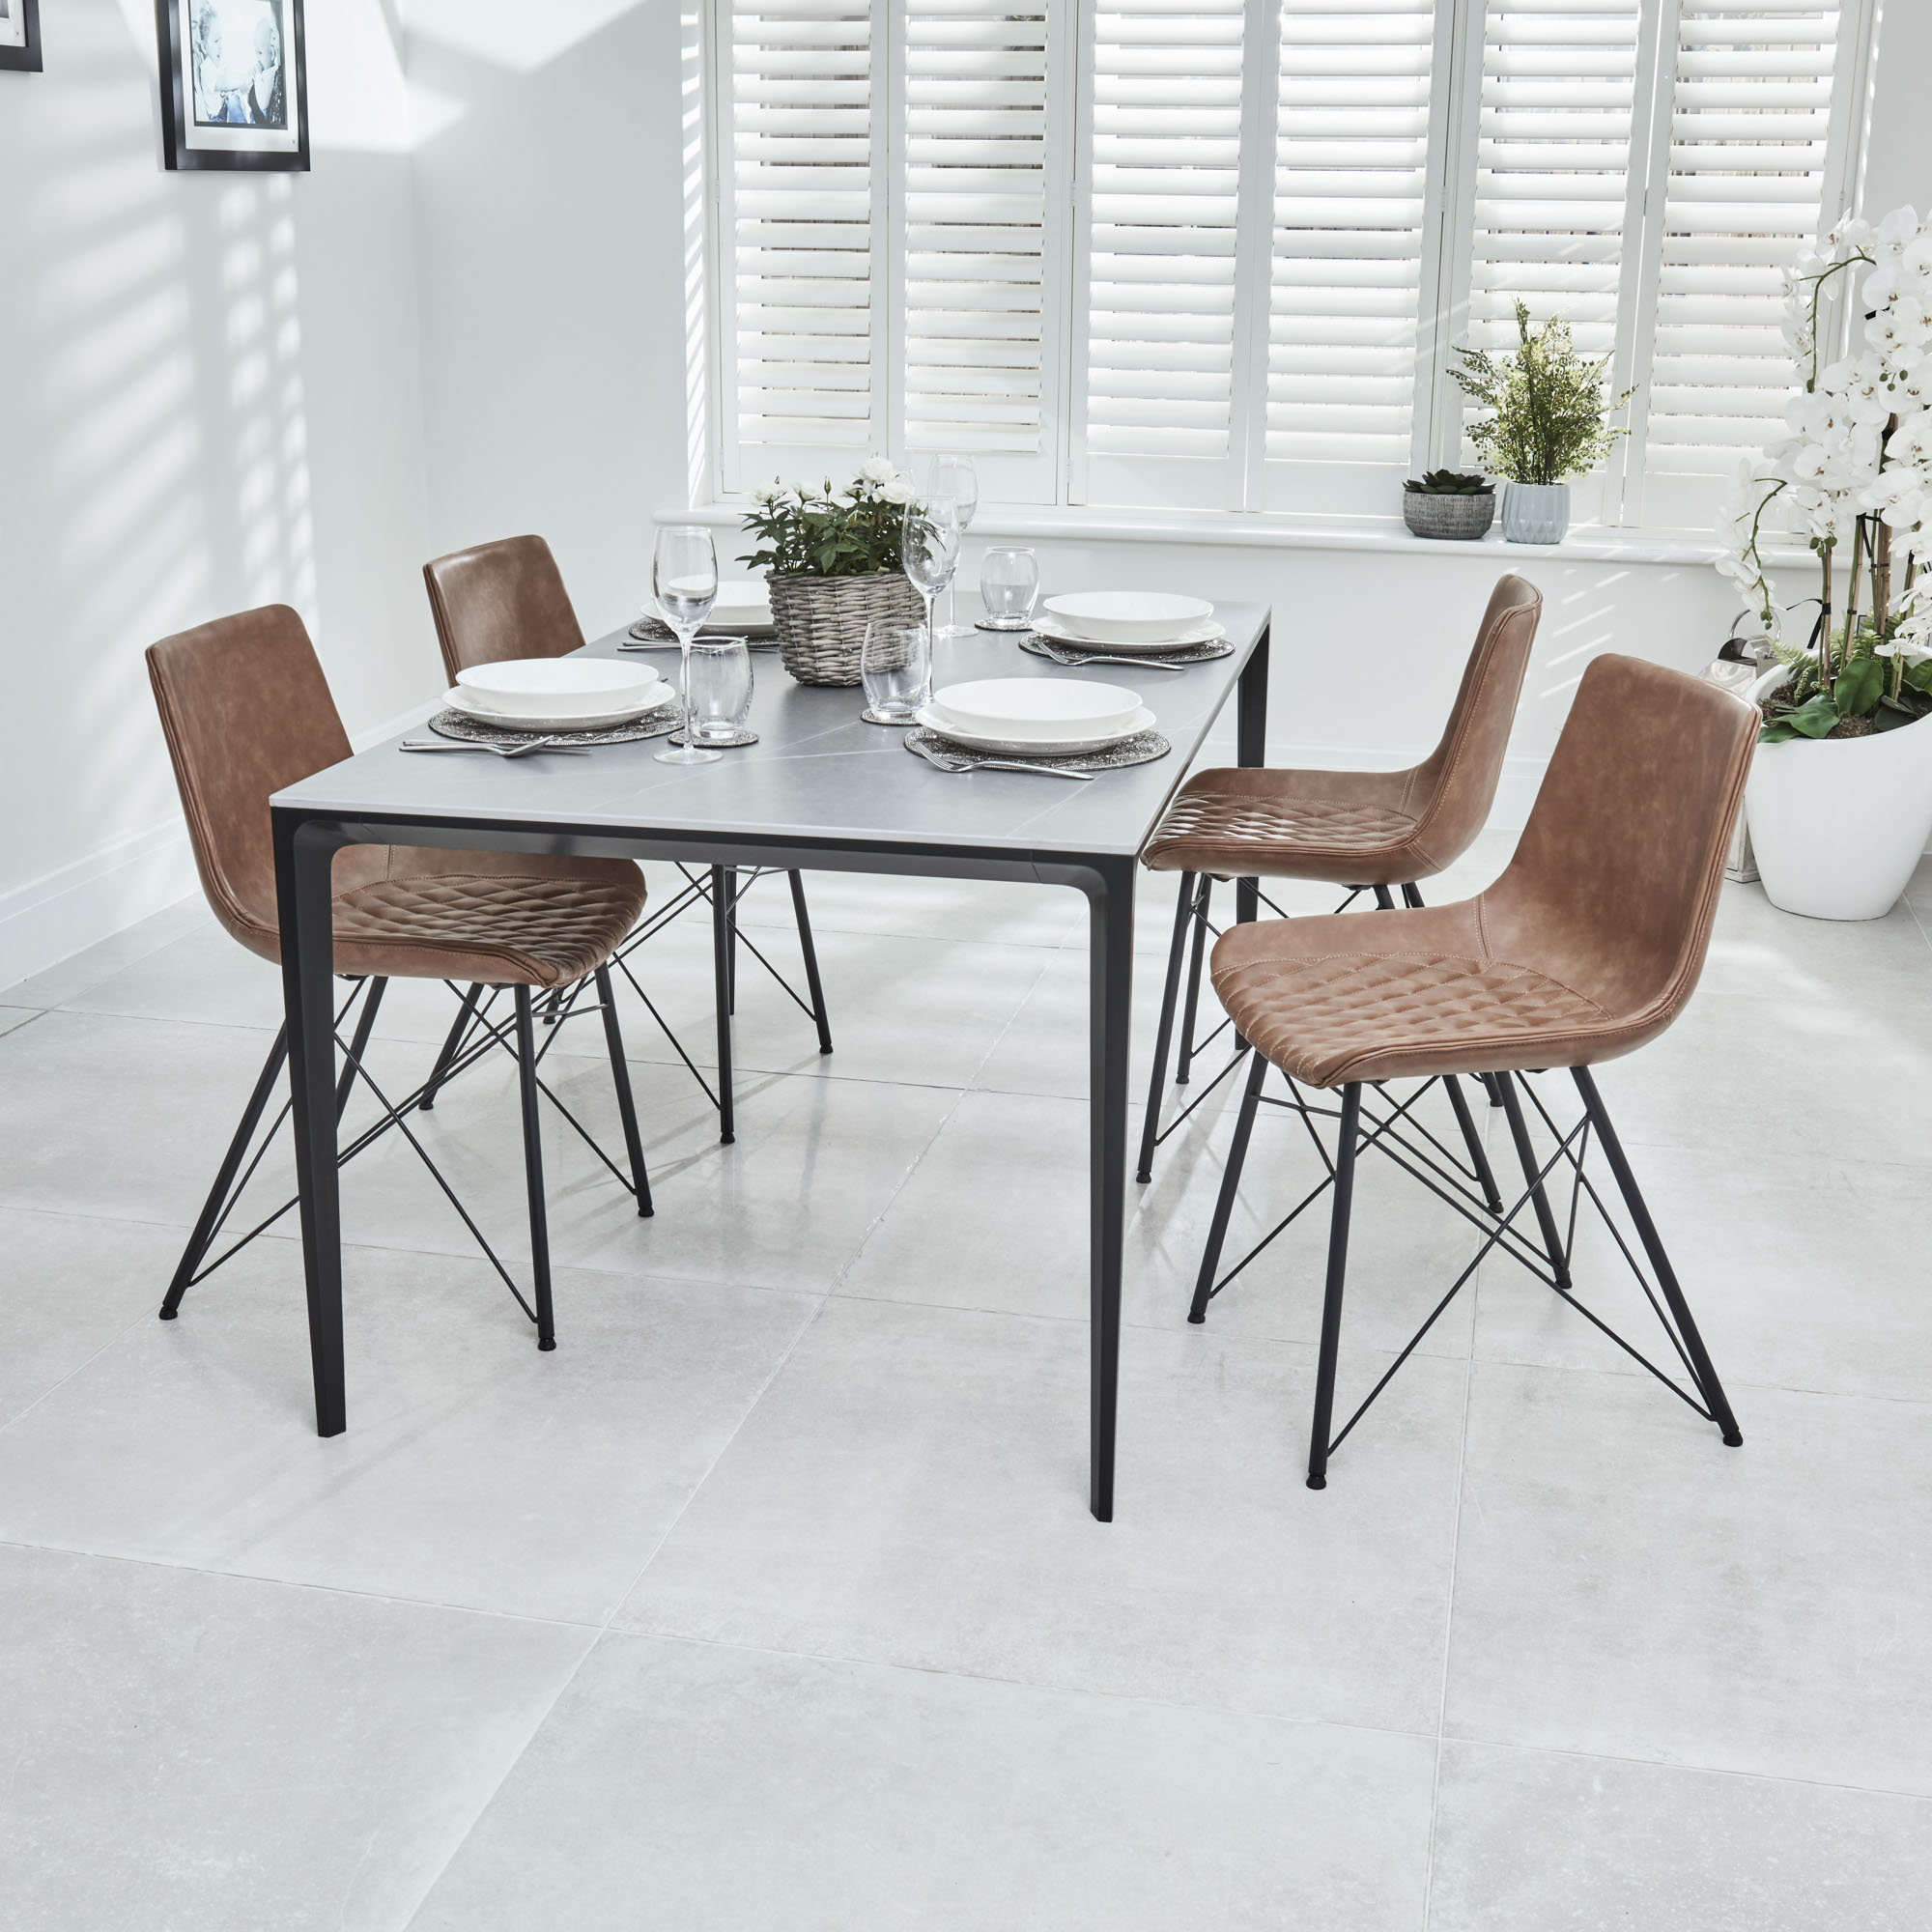 Bellagio 1.6M Grey Sintered Stone Dining Table Set with 4x Leon Tan Dining Chairs